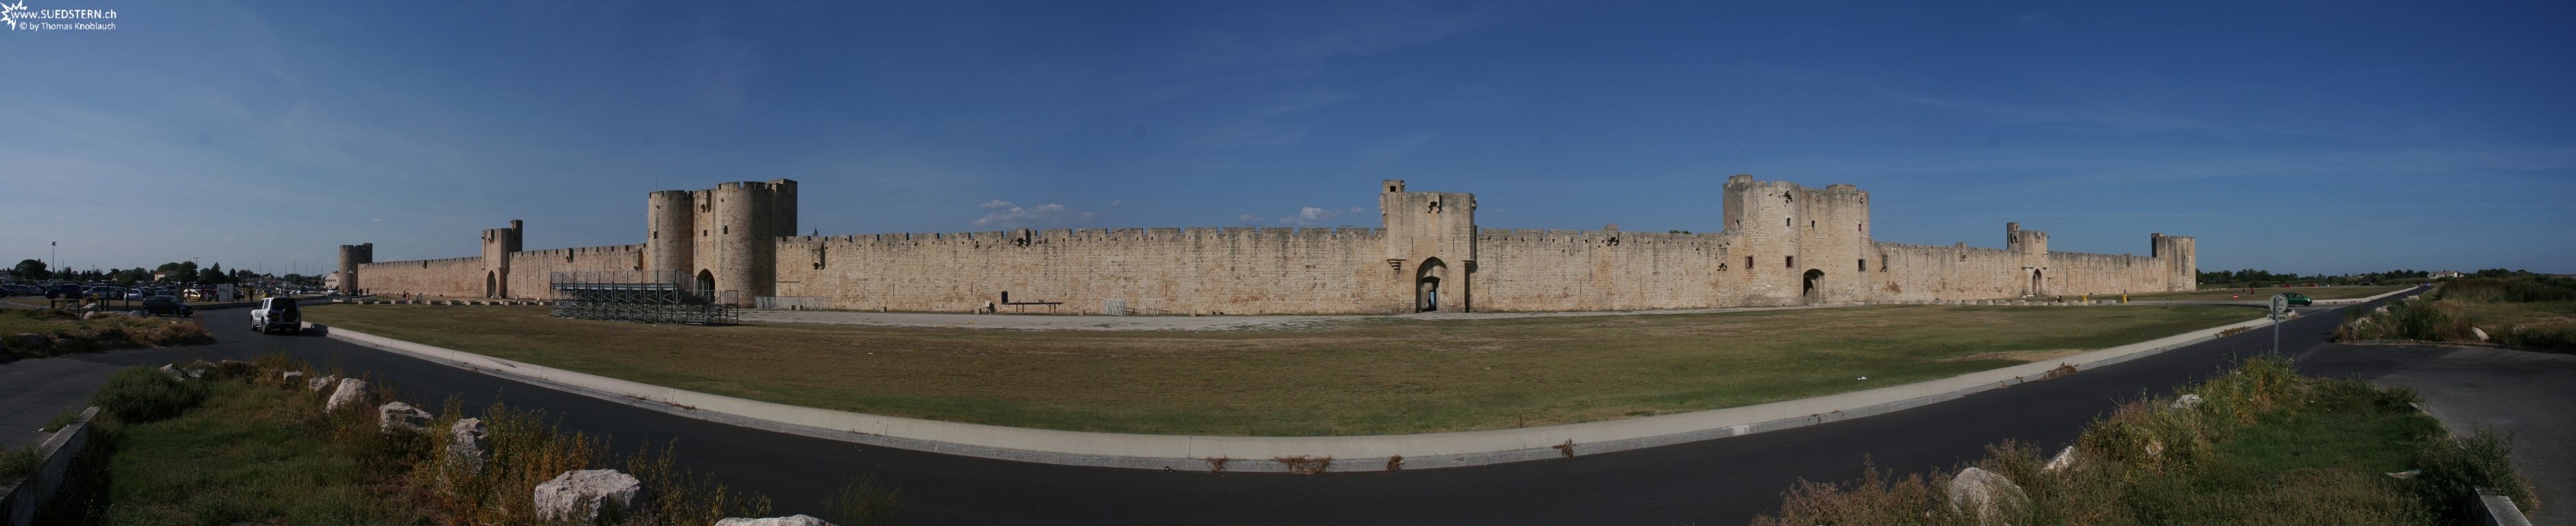 2008-08-27 - Panorama of city wall of Aigues-Mortes 4, france